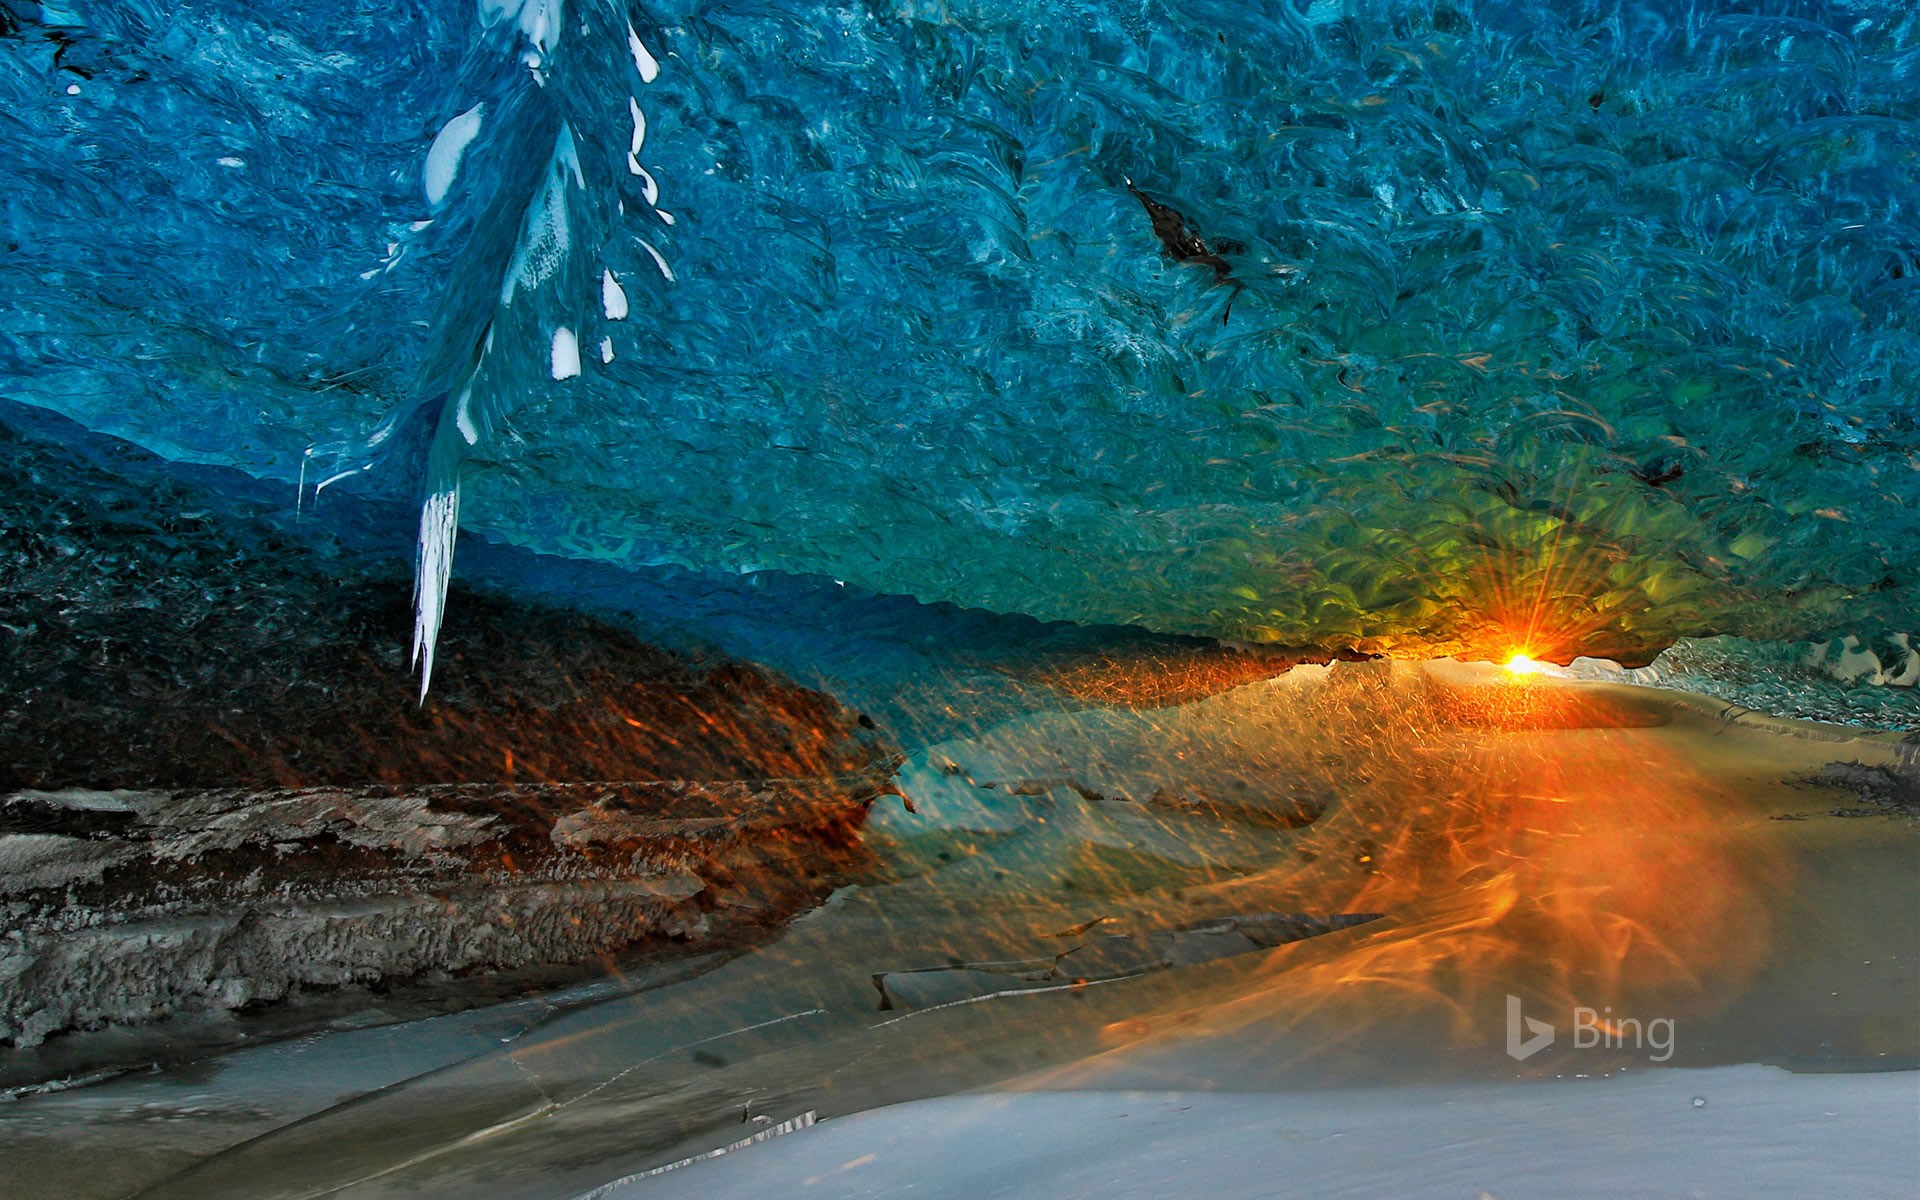 Ice cave at sunset in Vatnajökull National Park, Iceland